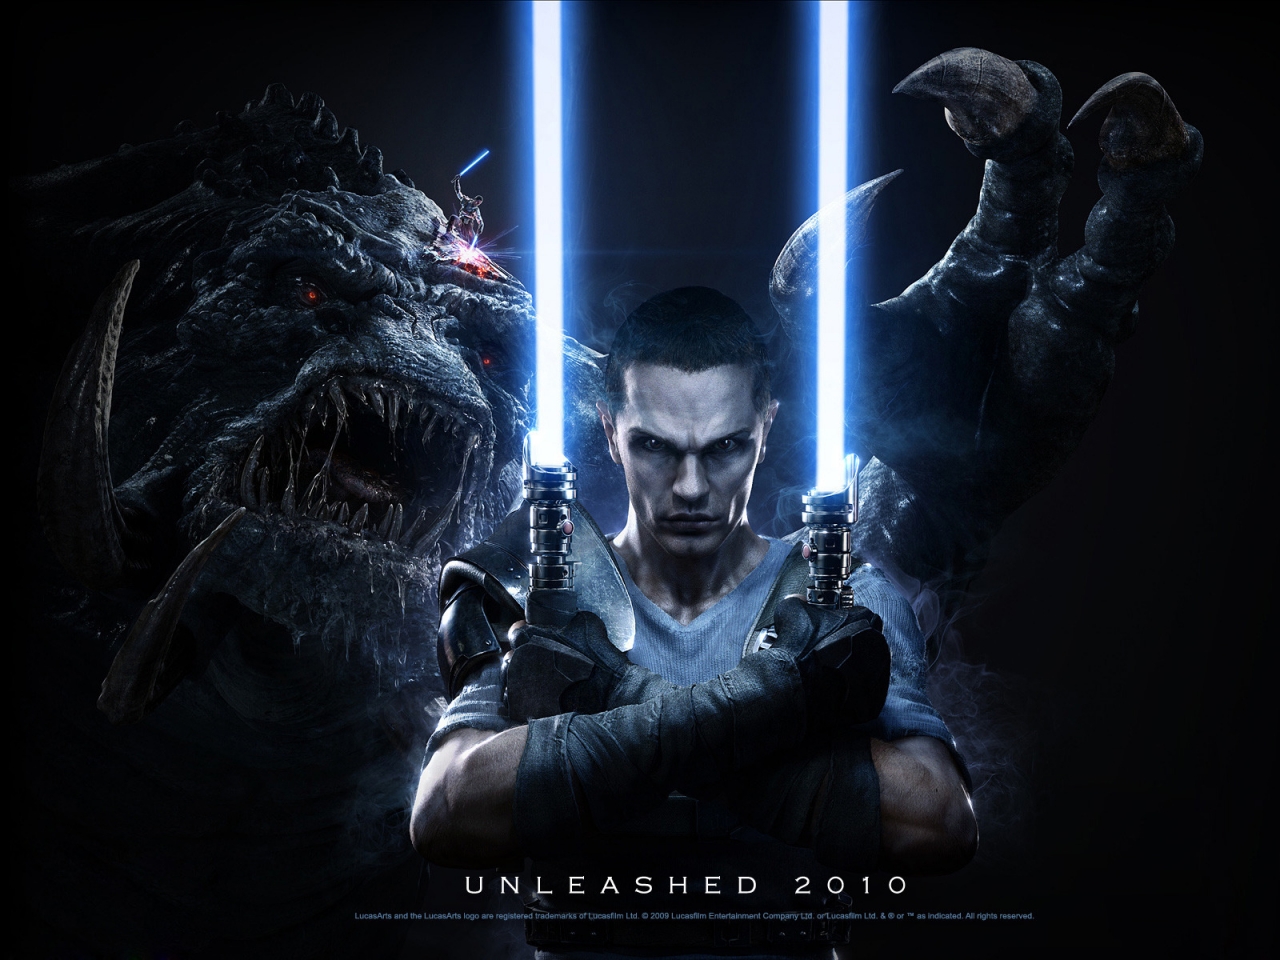 Star Wars The force Unleashed 2 for 1280 x 960 resolution